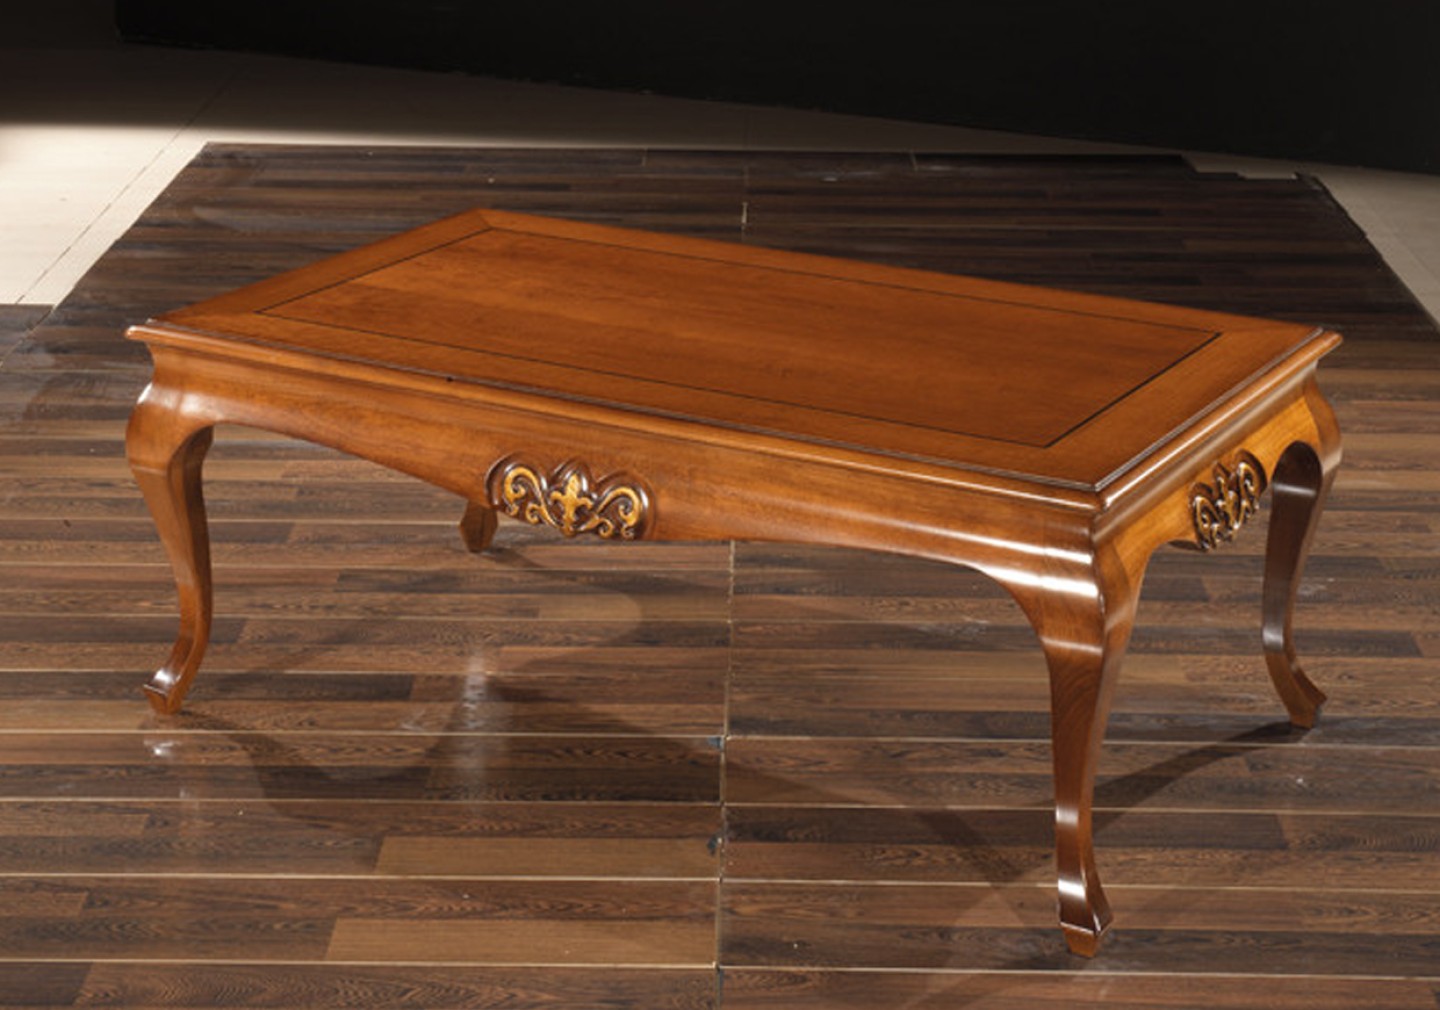 THE ZEPHYR CLASSIC COFFEE TABLE